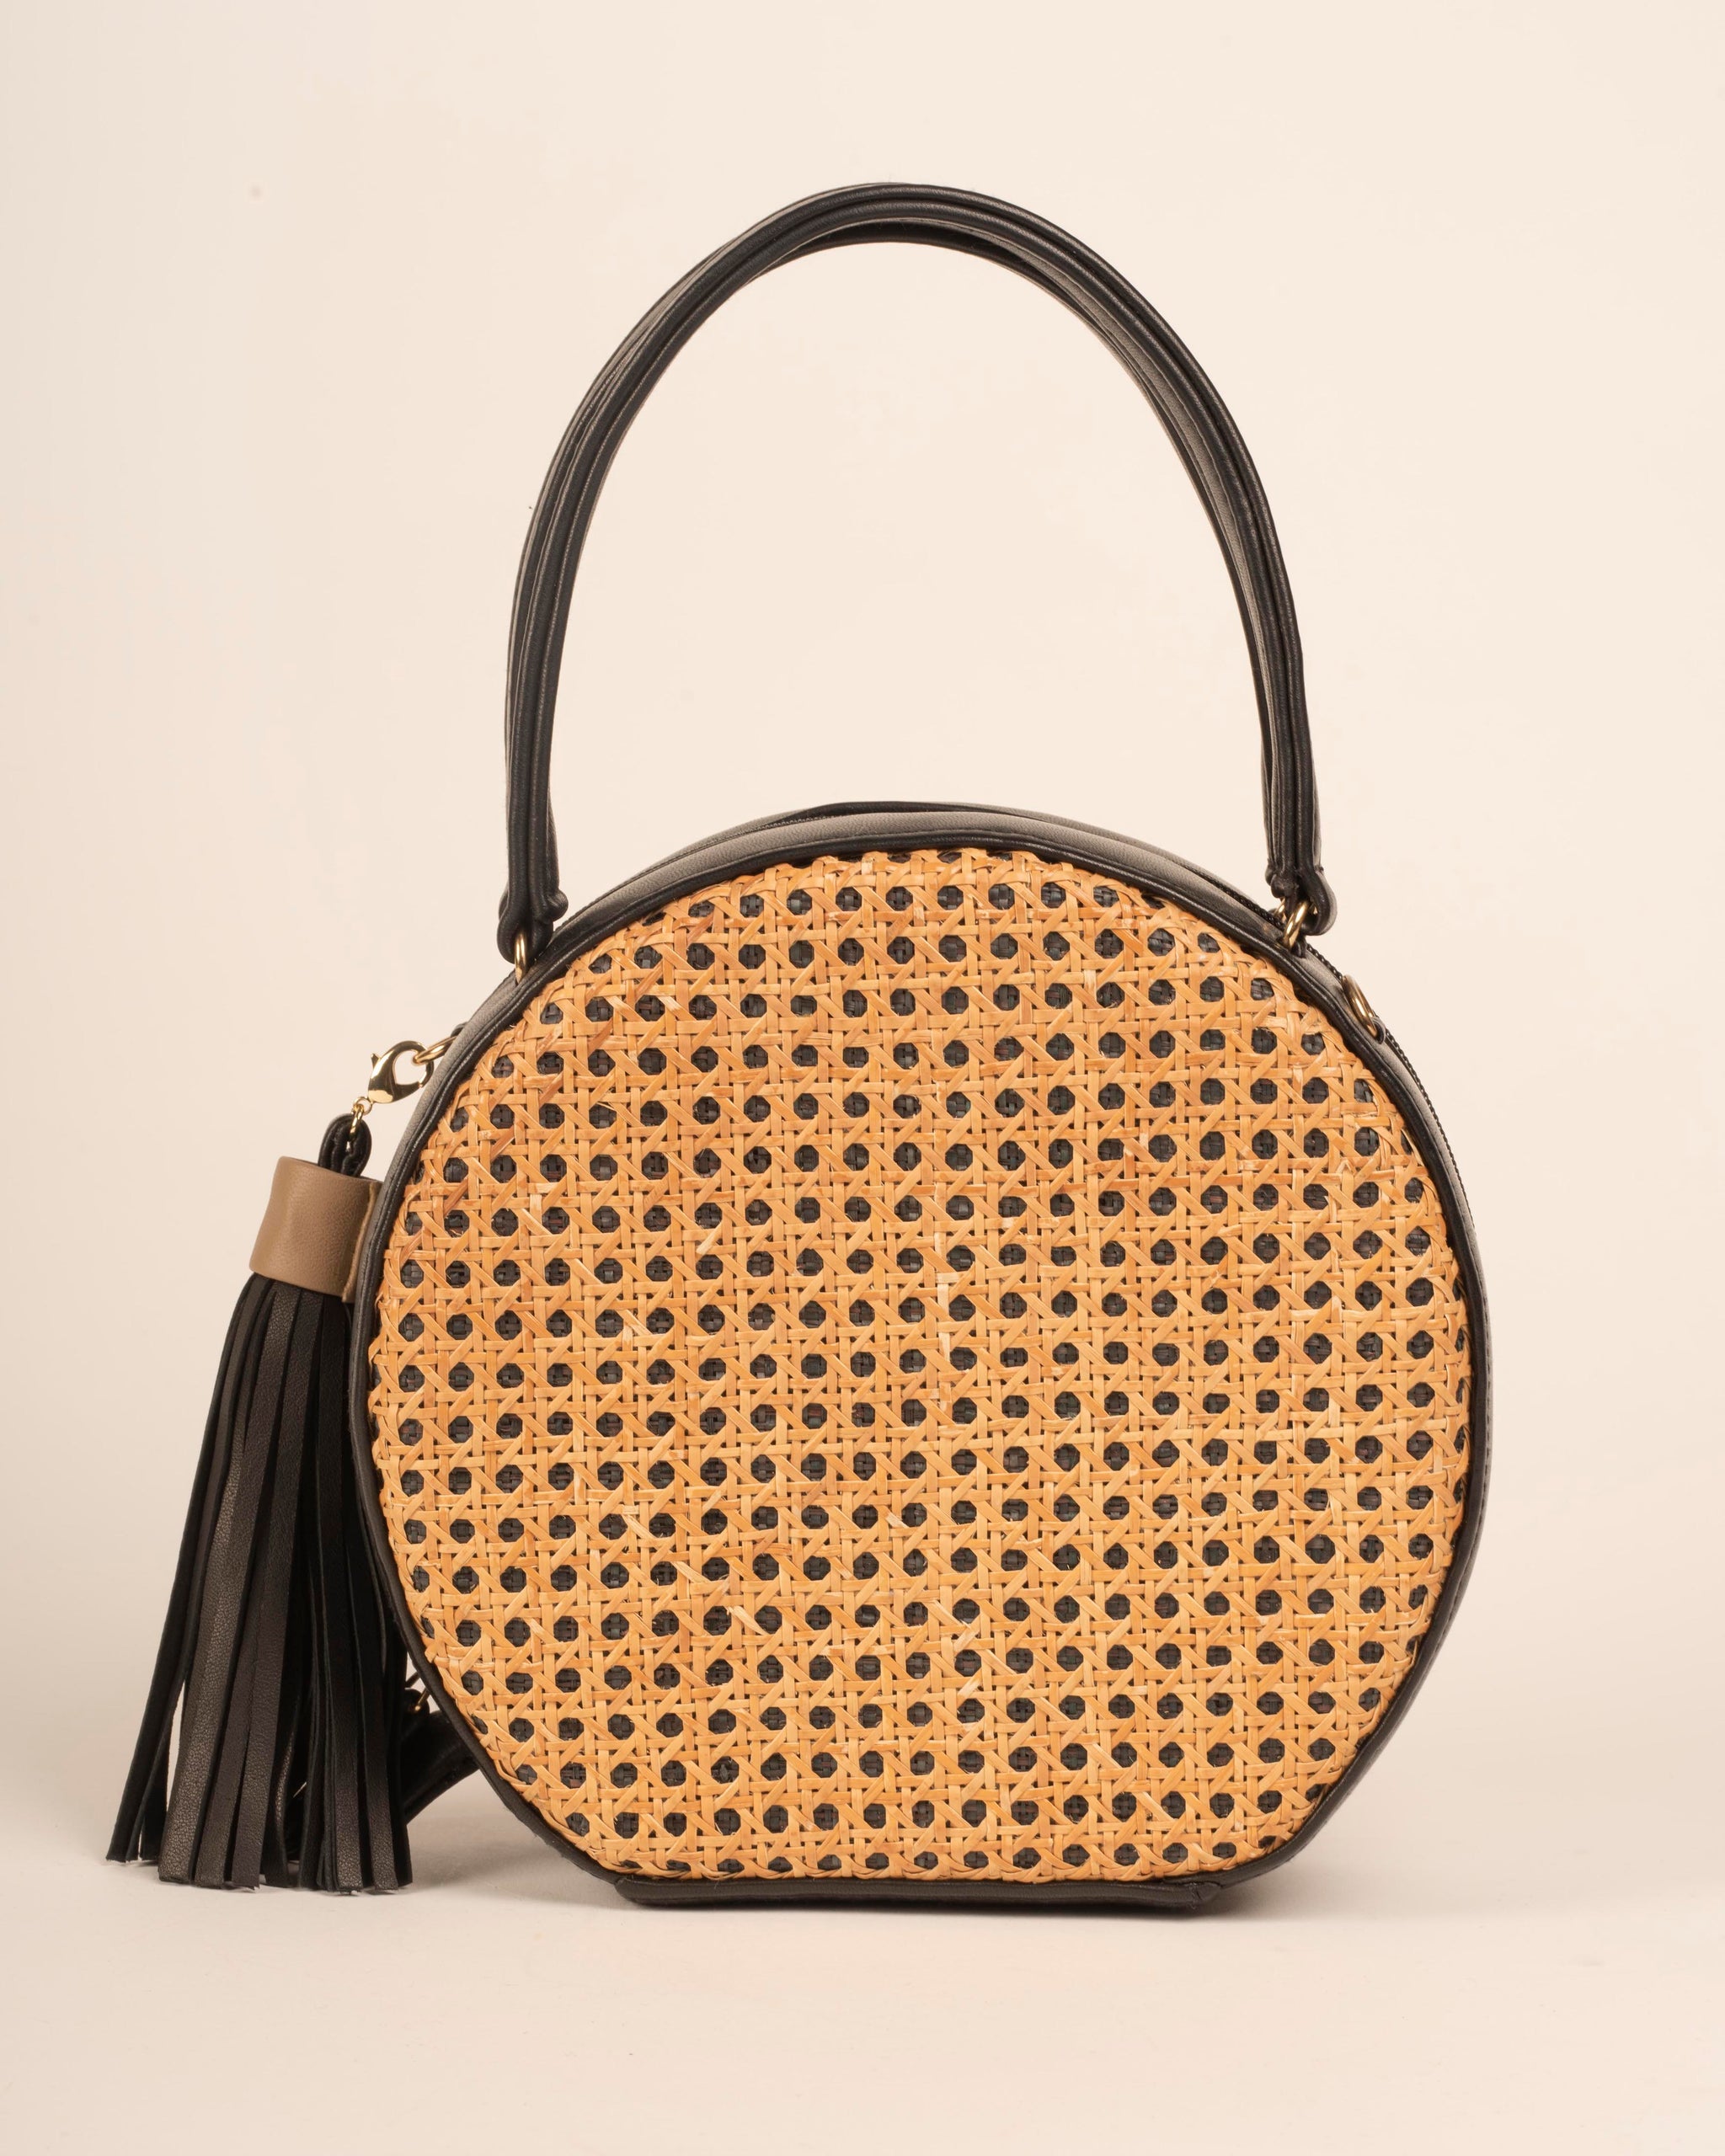 Handmade Moroccan Round Straw Crossbody Bag with Leather Detail